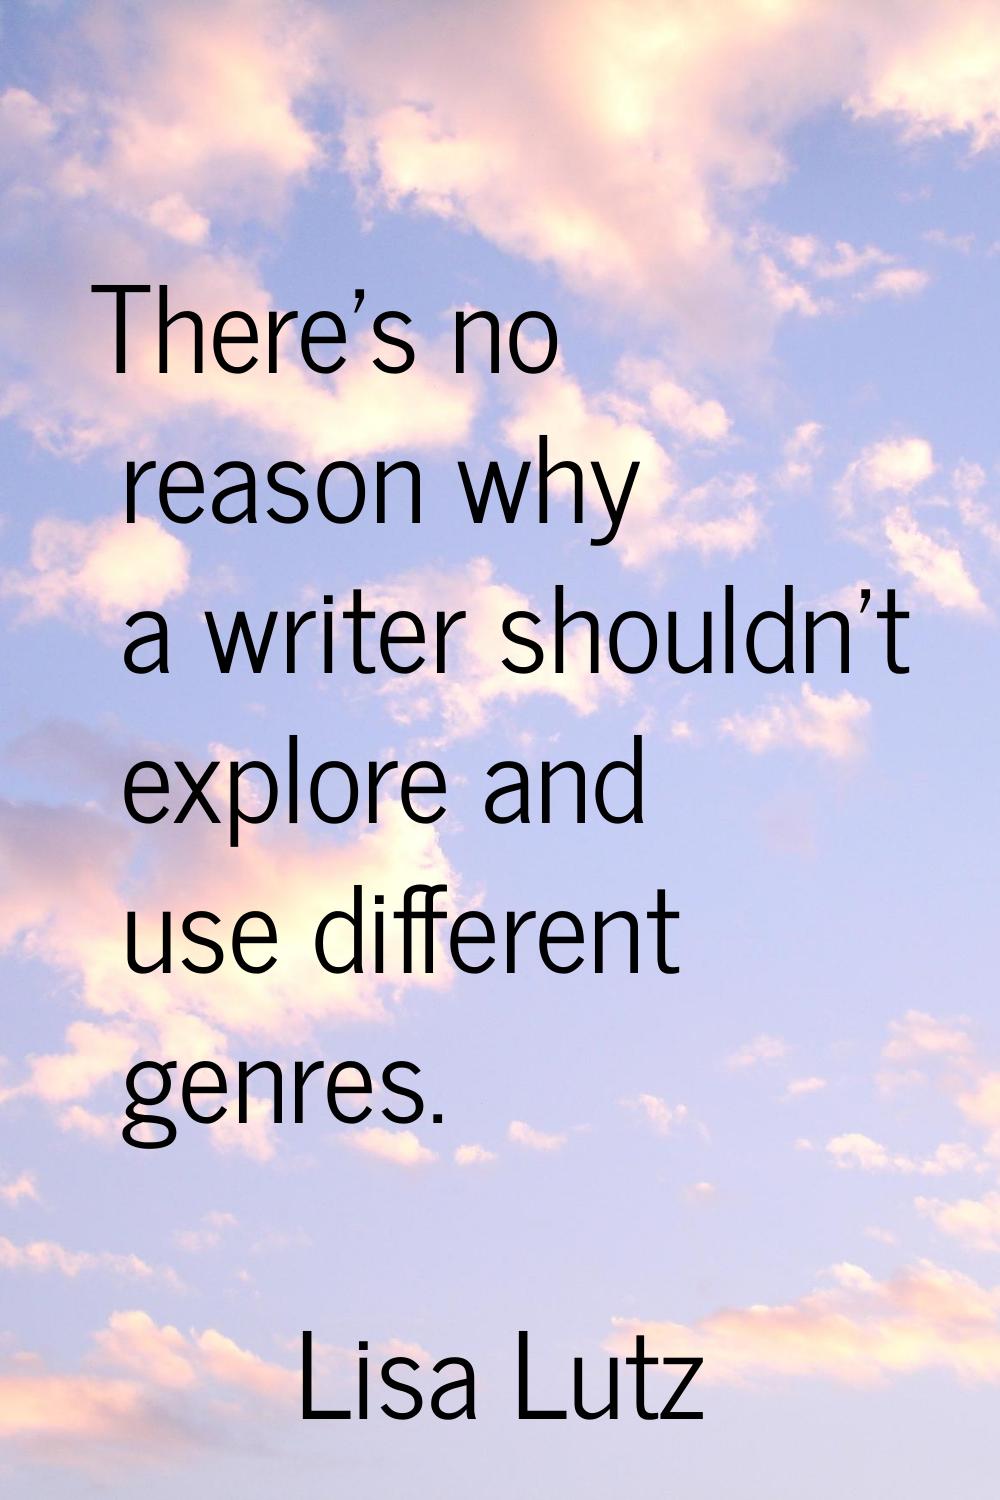 There's no reason why a writer shouldn't explore and use different genres.